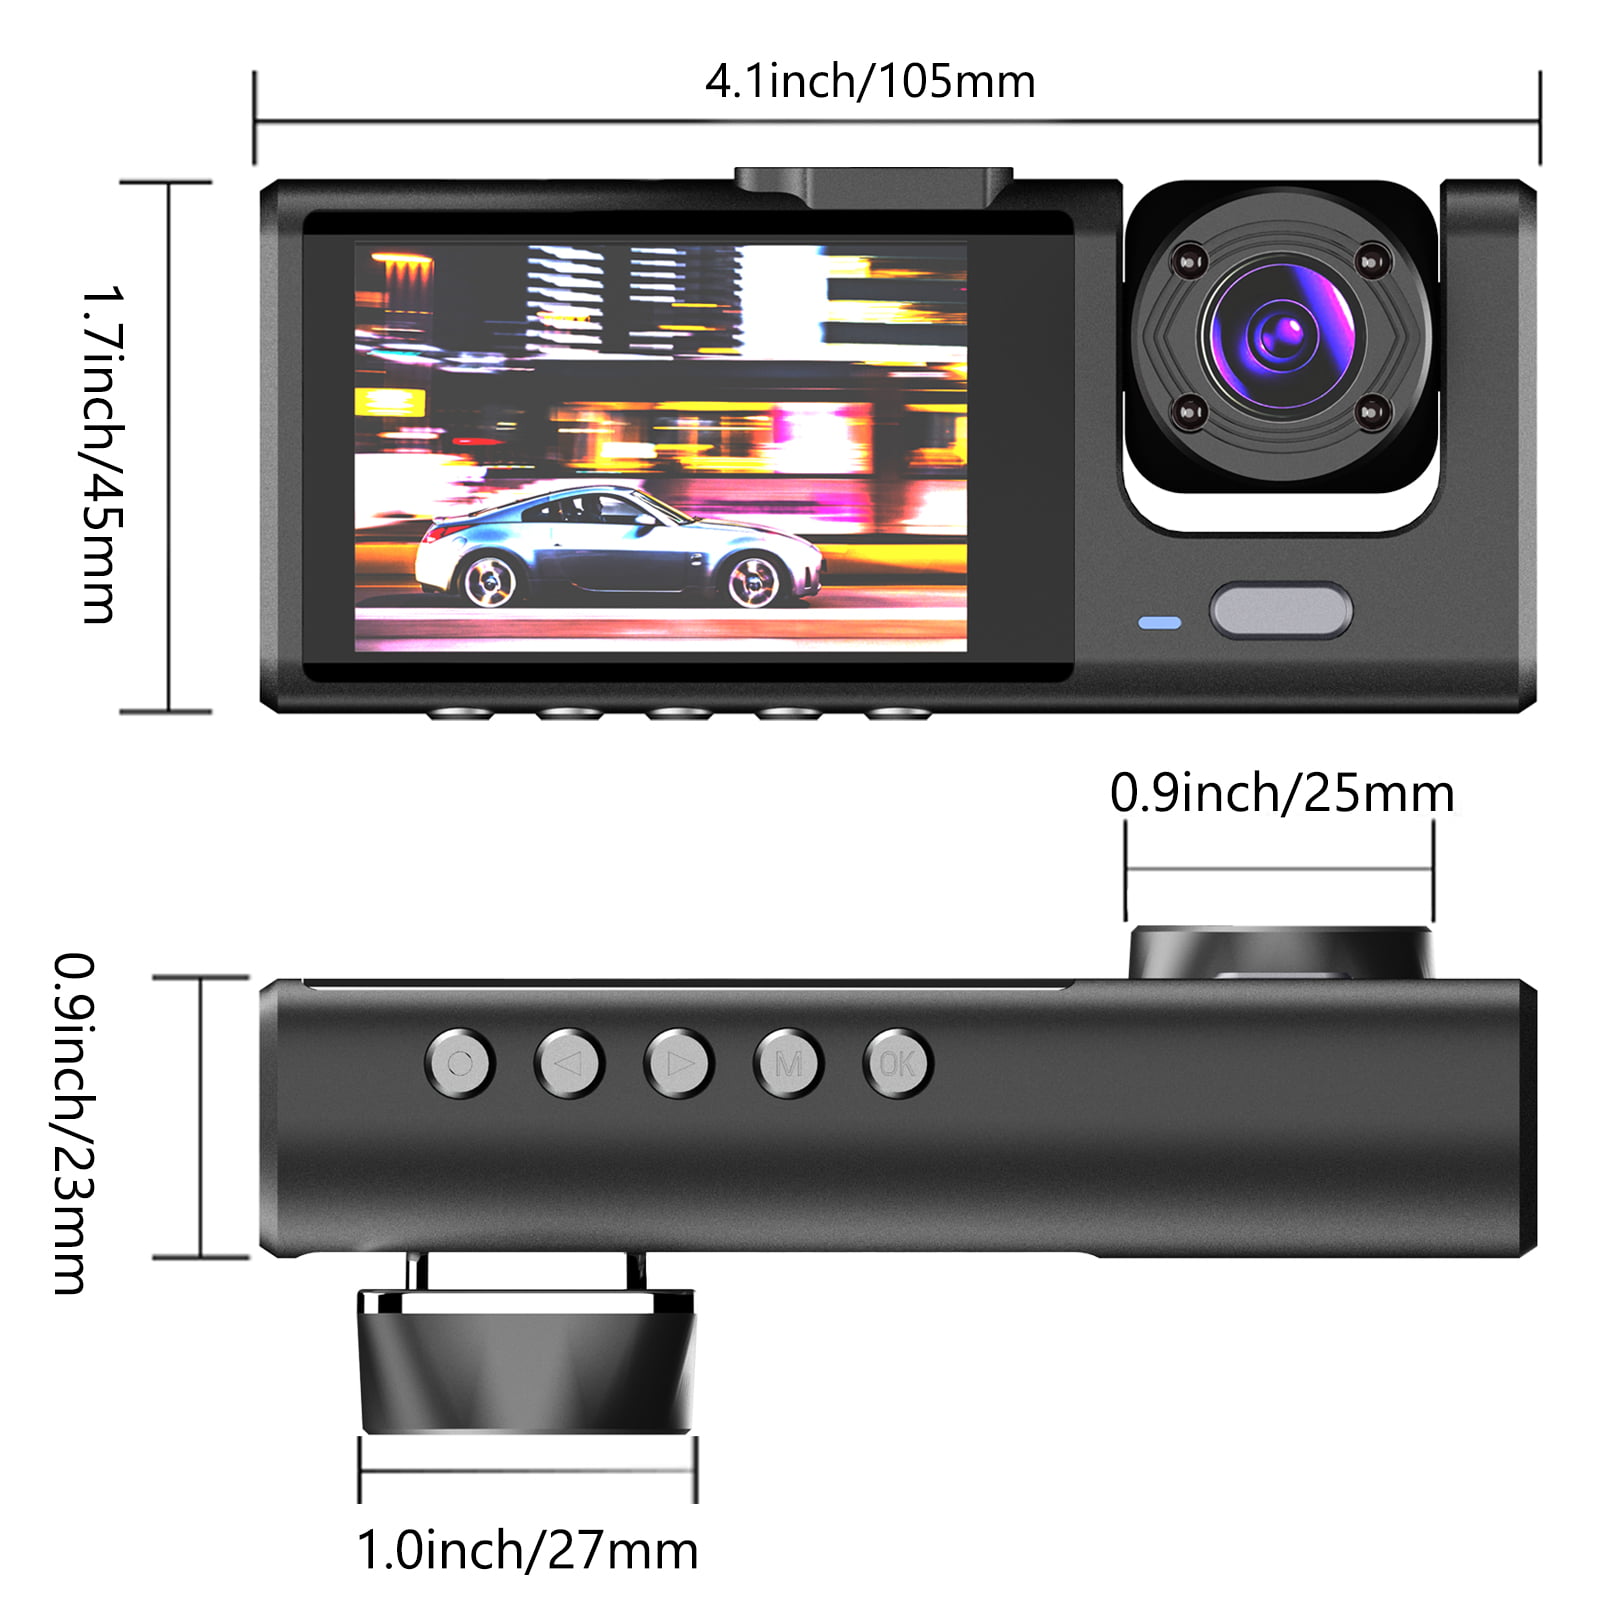 3 Channel Dash Cam Front and Rear Inside, 1080P Dash Camera for Cars,  Dashcam Three Way Triple Car Camera with IR Night Vision, Loop Recording,  G-Sensor, Parking Monitor, 24 Hours Recording 